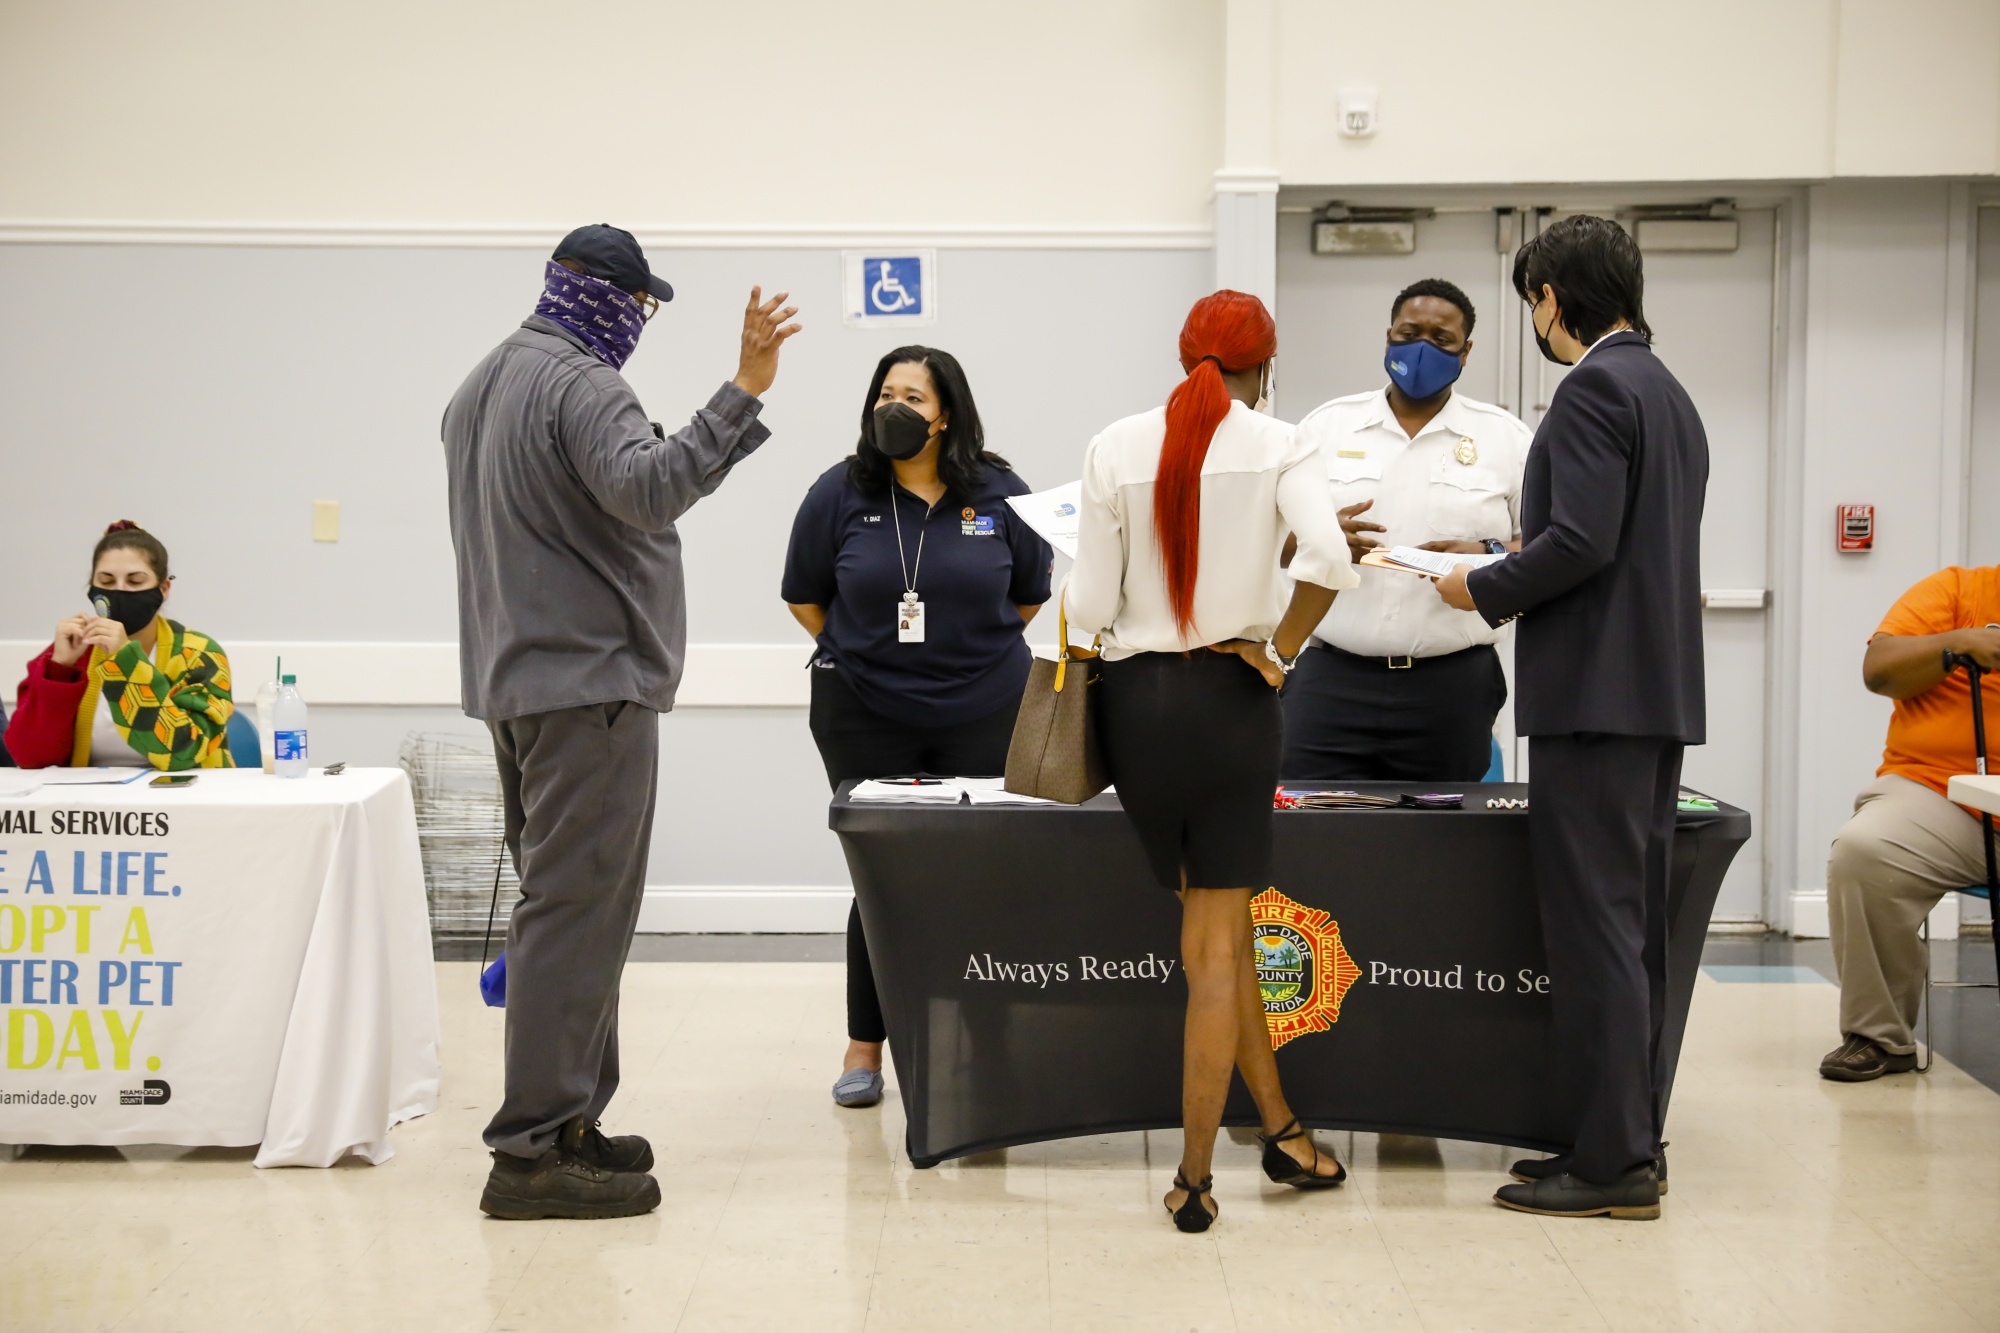 Recruiters speak with job seekers during a Miami-Dade County job fair in Florida on Dec. 16.